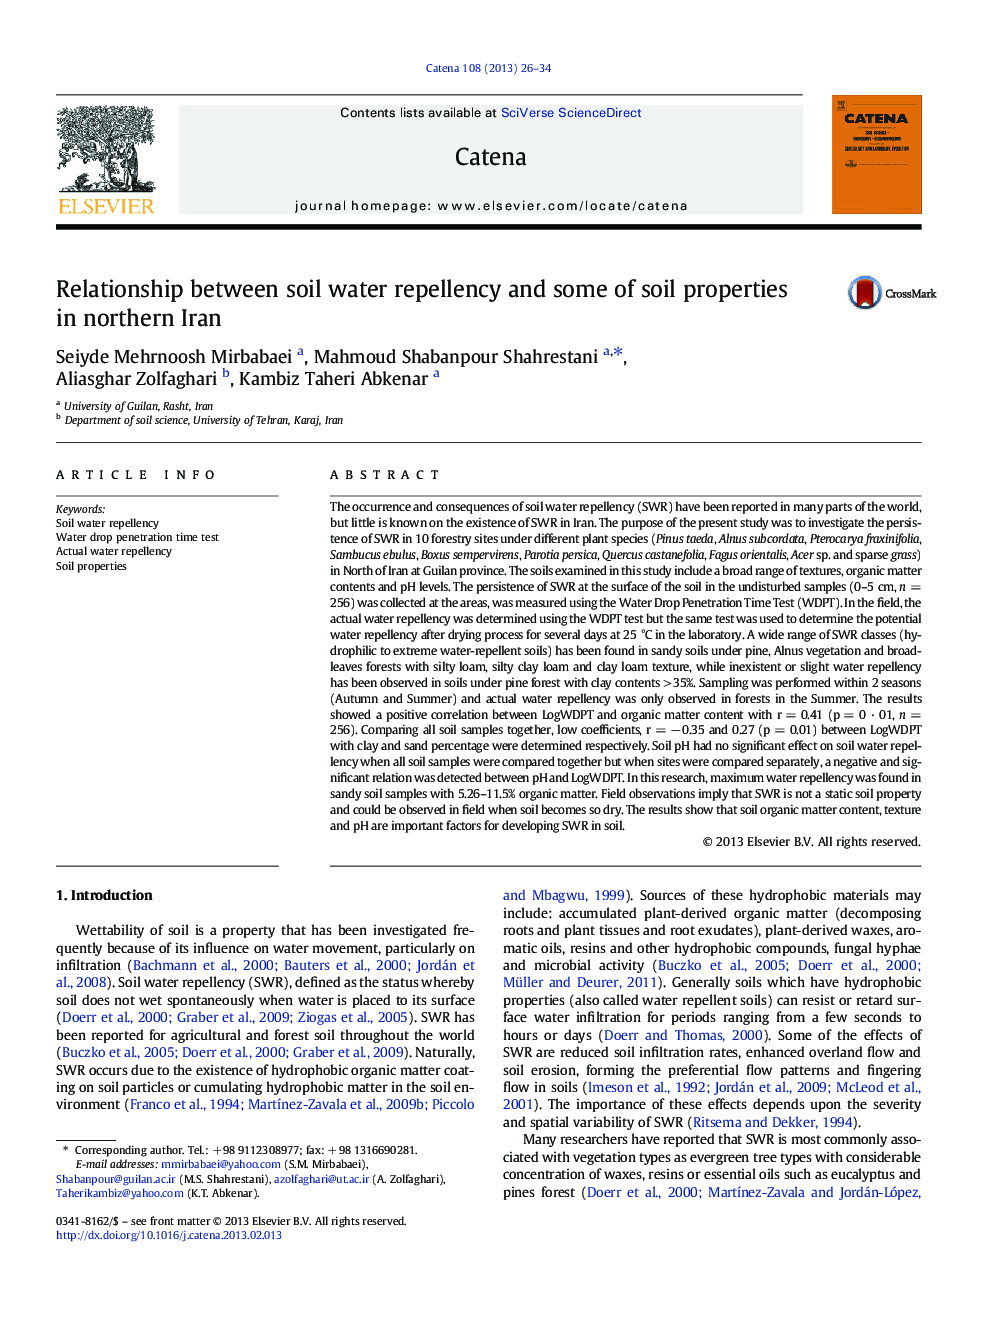 Relationship between soil water repellency and some of soil properties in northern Iran